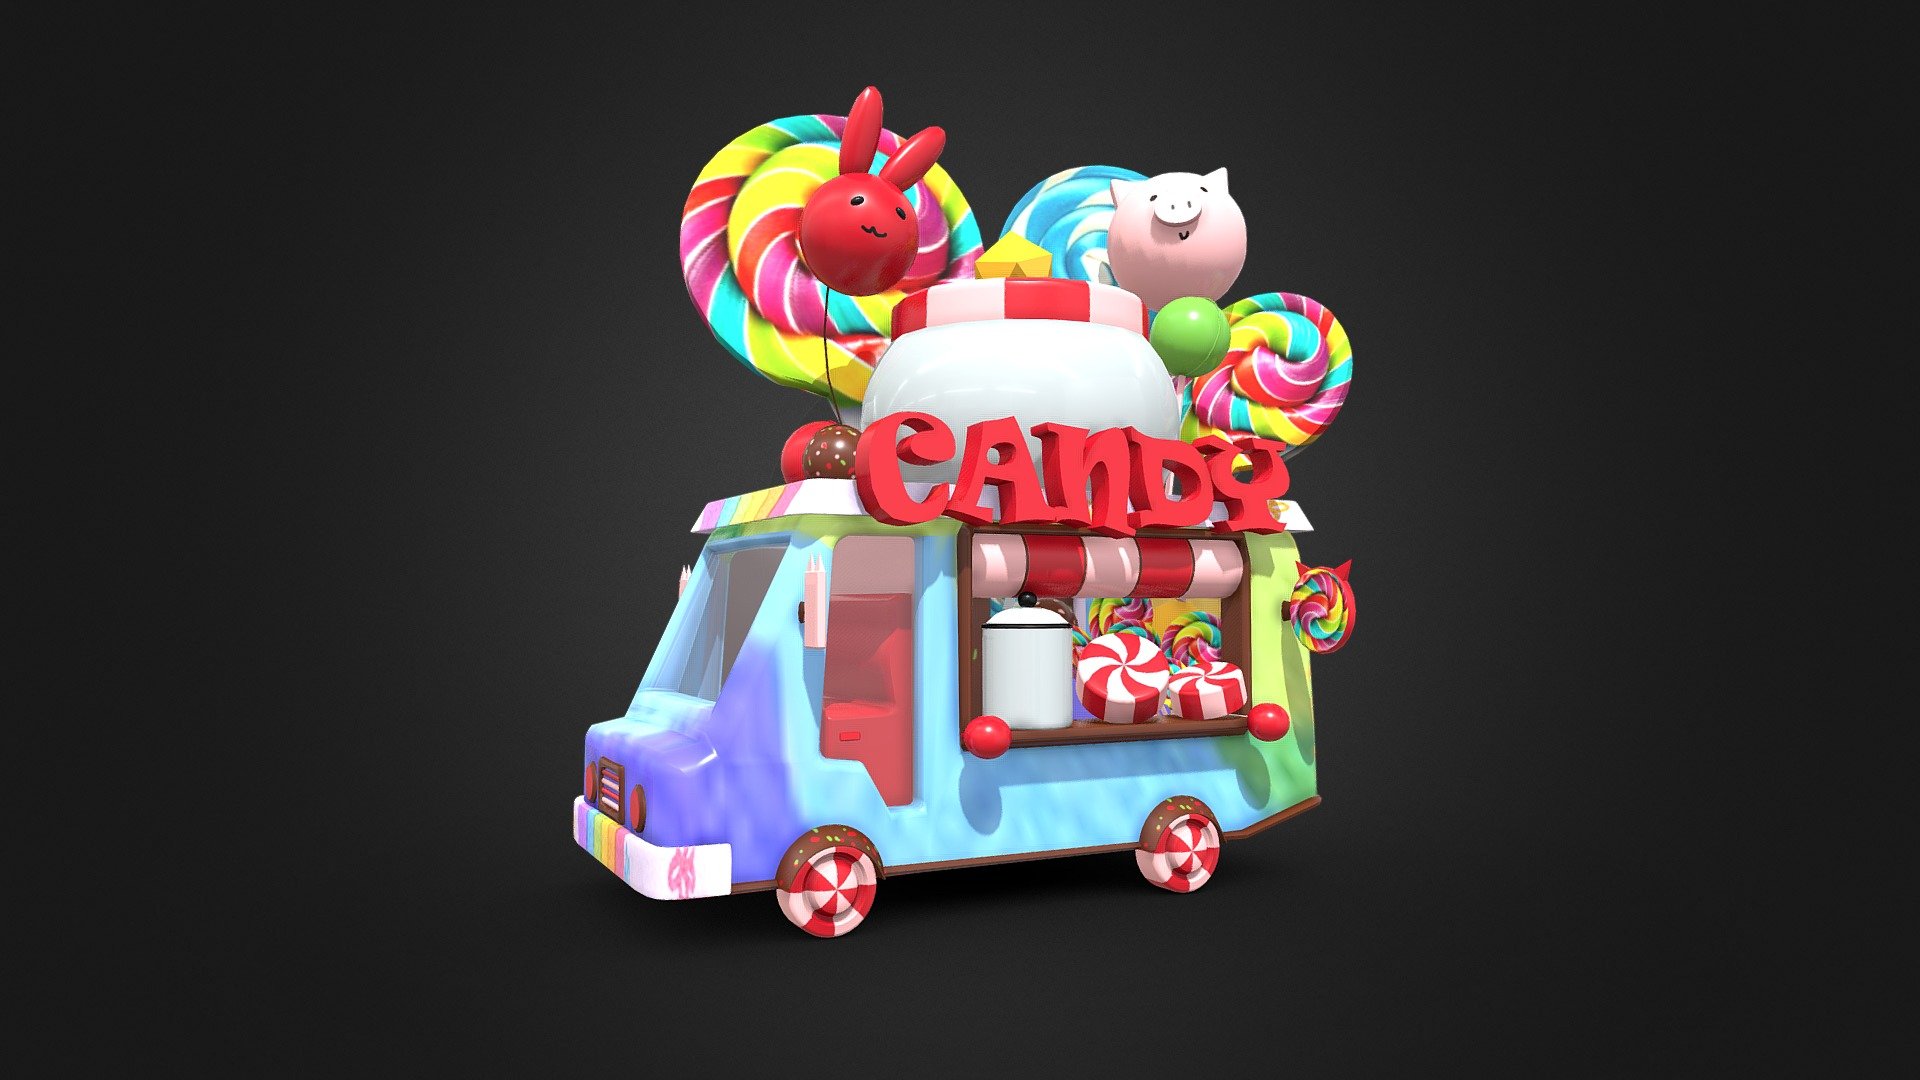 *Description




-3d model of Food Car Candy.

-This 3D model is best for use in games.

-The model is equipped with all required PBR textures.

-Model is built with great attention to details and realistic proportions with correct geometry.

-Textures are very detailed so it makes this model good enough for close-up


*Technical details:




-Full PBR textures sets. 



-The model is divided into few manys object.

-Model is completely unwrapped.

-Model is fully textured with all -materials applied.

-Pivot points are correctly placed to suit optional animation process.

-Model scaled to approximate real world size (centimeters).

-All nodes, materials and textures are appropriately named.


*Available file formats:




-Maya files and example render scenes.(packed and regular-unpacked)



-Maya (.ma)

-3ds Max 2018 (.max)

-Autodesk FBX (.fbx)

-OBJ (.obj)

*Additional Info:
* -This model is not intended for 3D printing 3d model